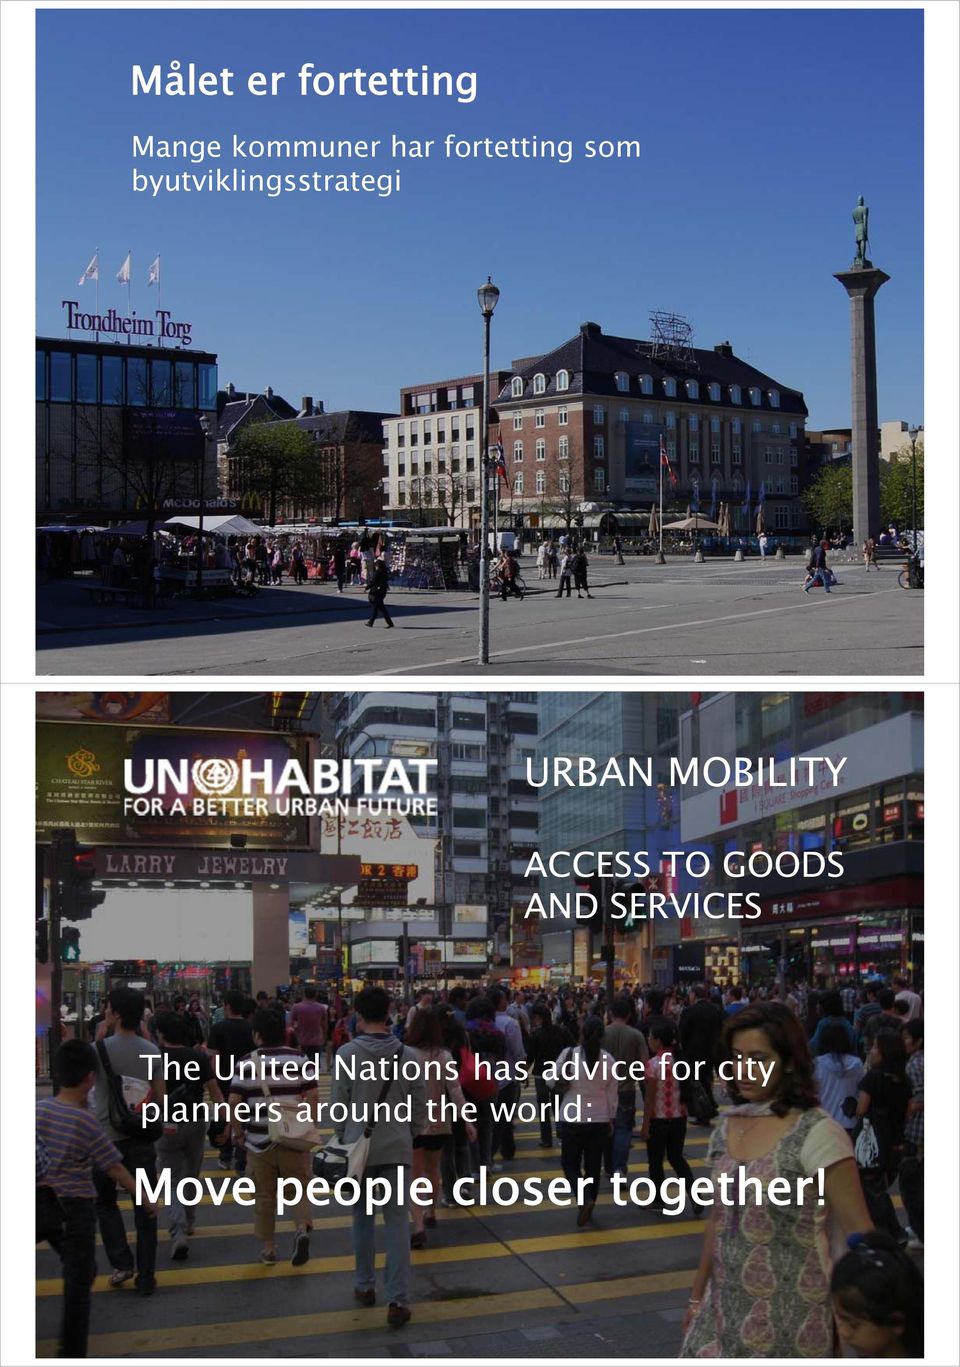 AND SERVICES The United Nations has advice for city